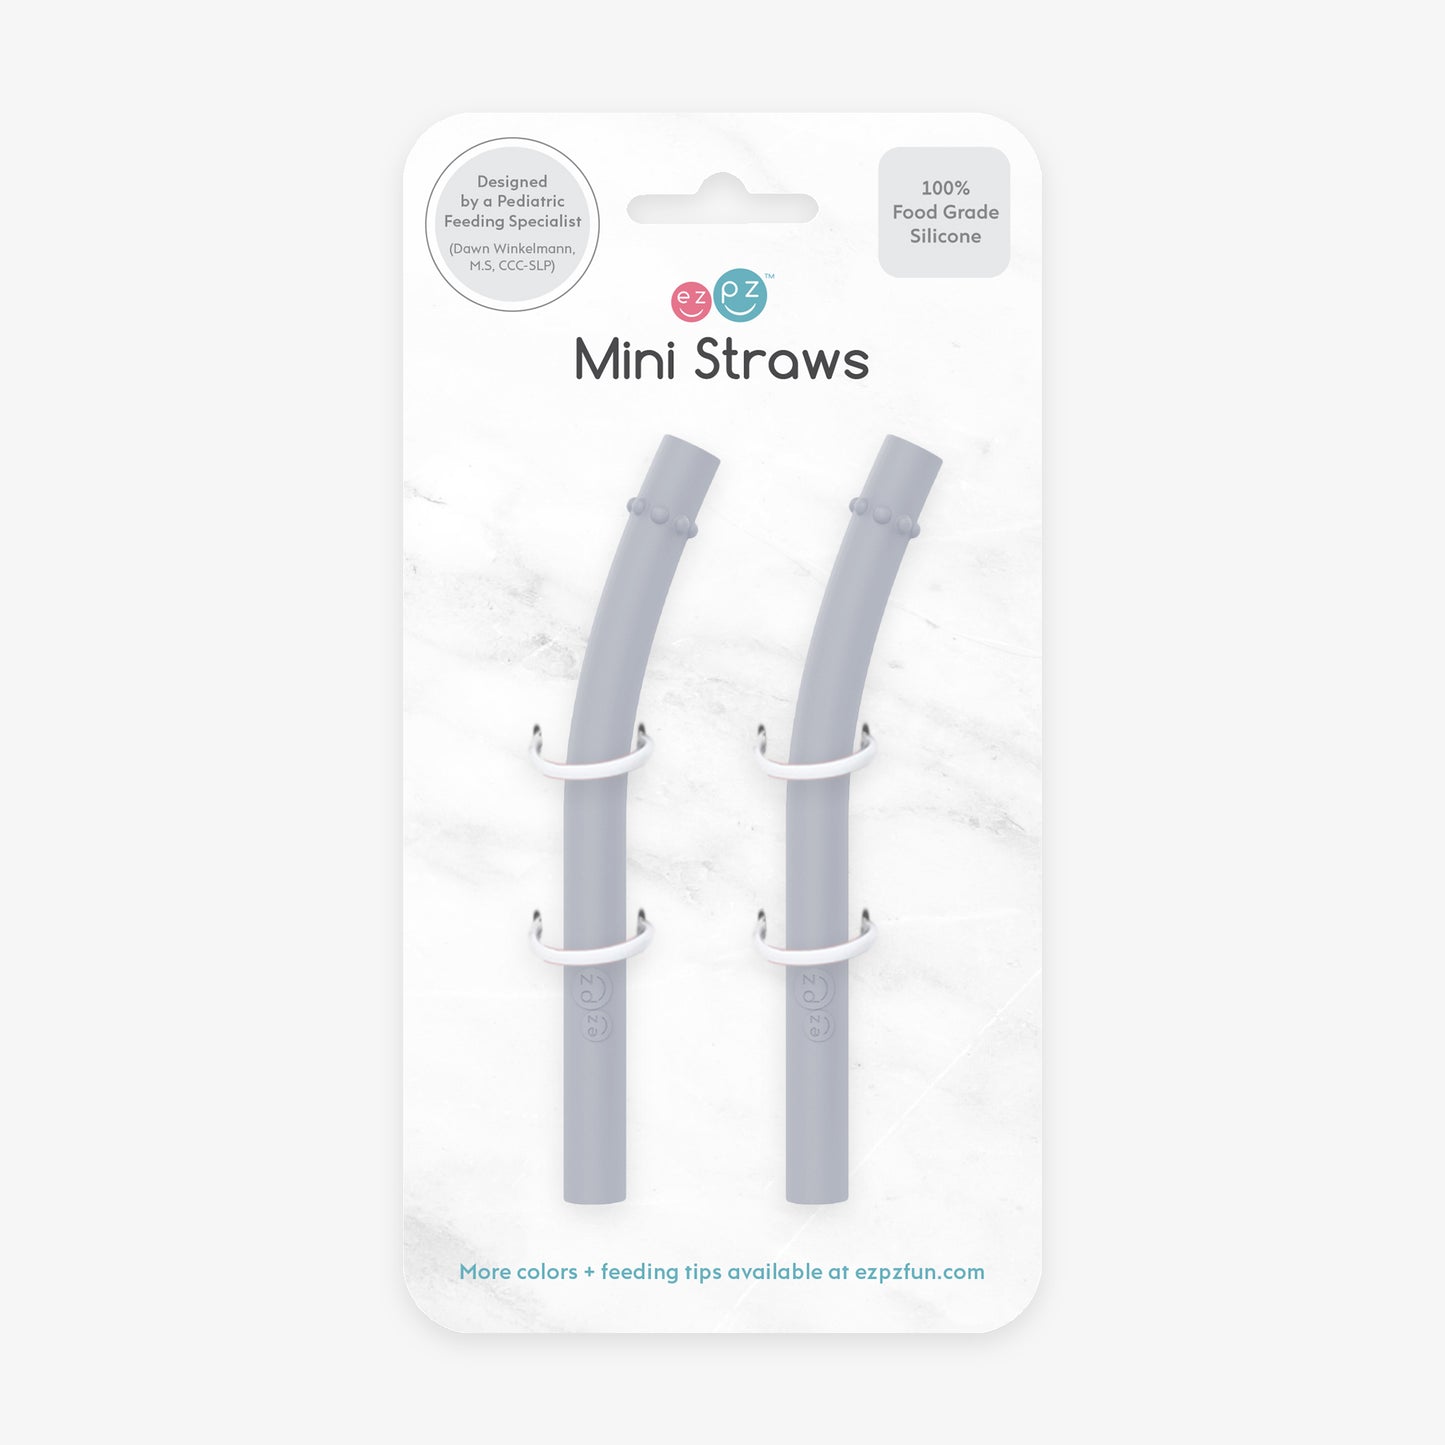 Mini Straws in Pewter / Silicone Straw Replacement Pack for the ezpz Mini Cup & Straw System